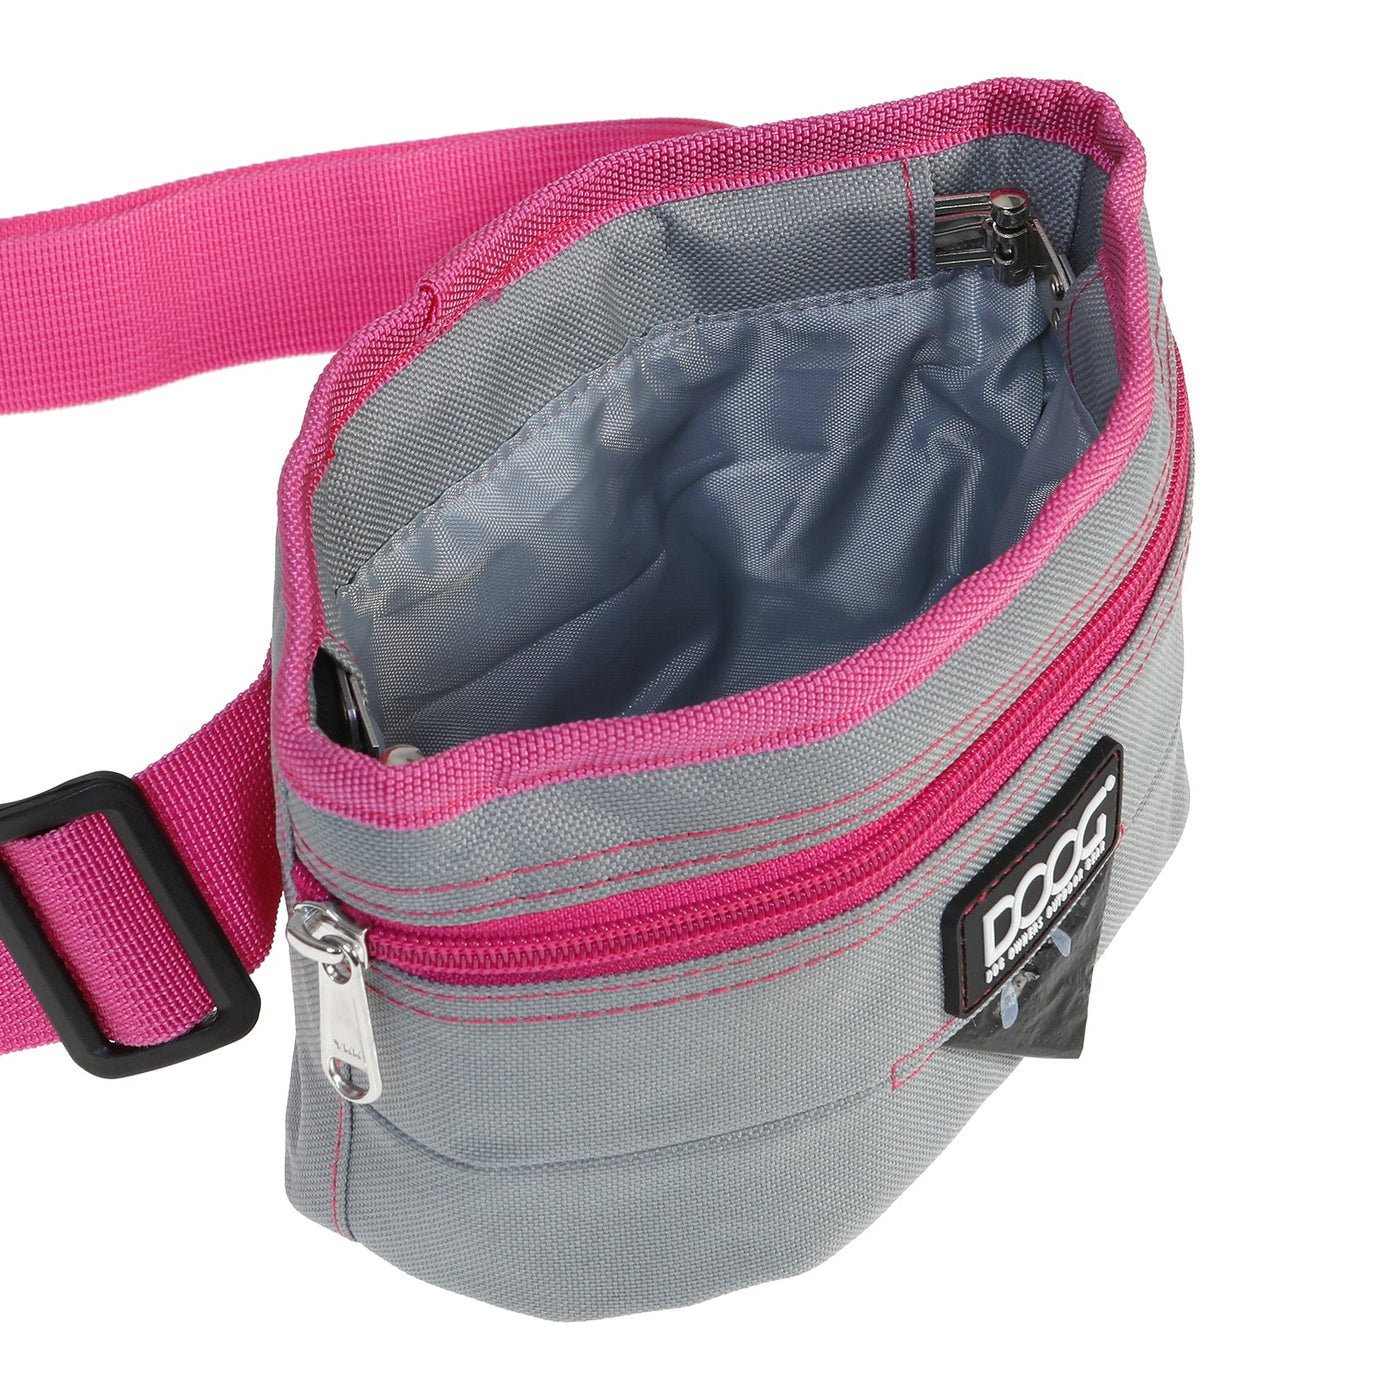 Good Dog Treat & Training Pouch - Grey & Pink (Large)